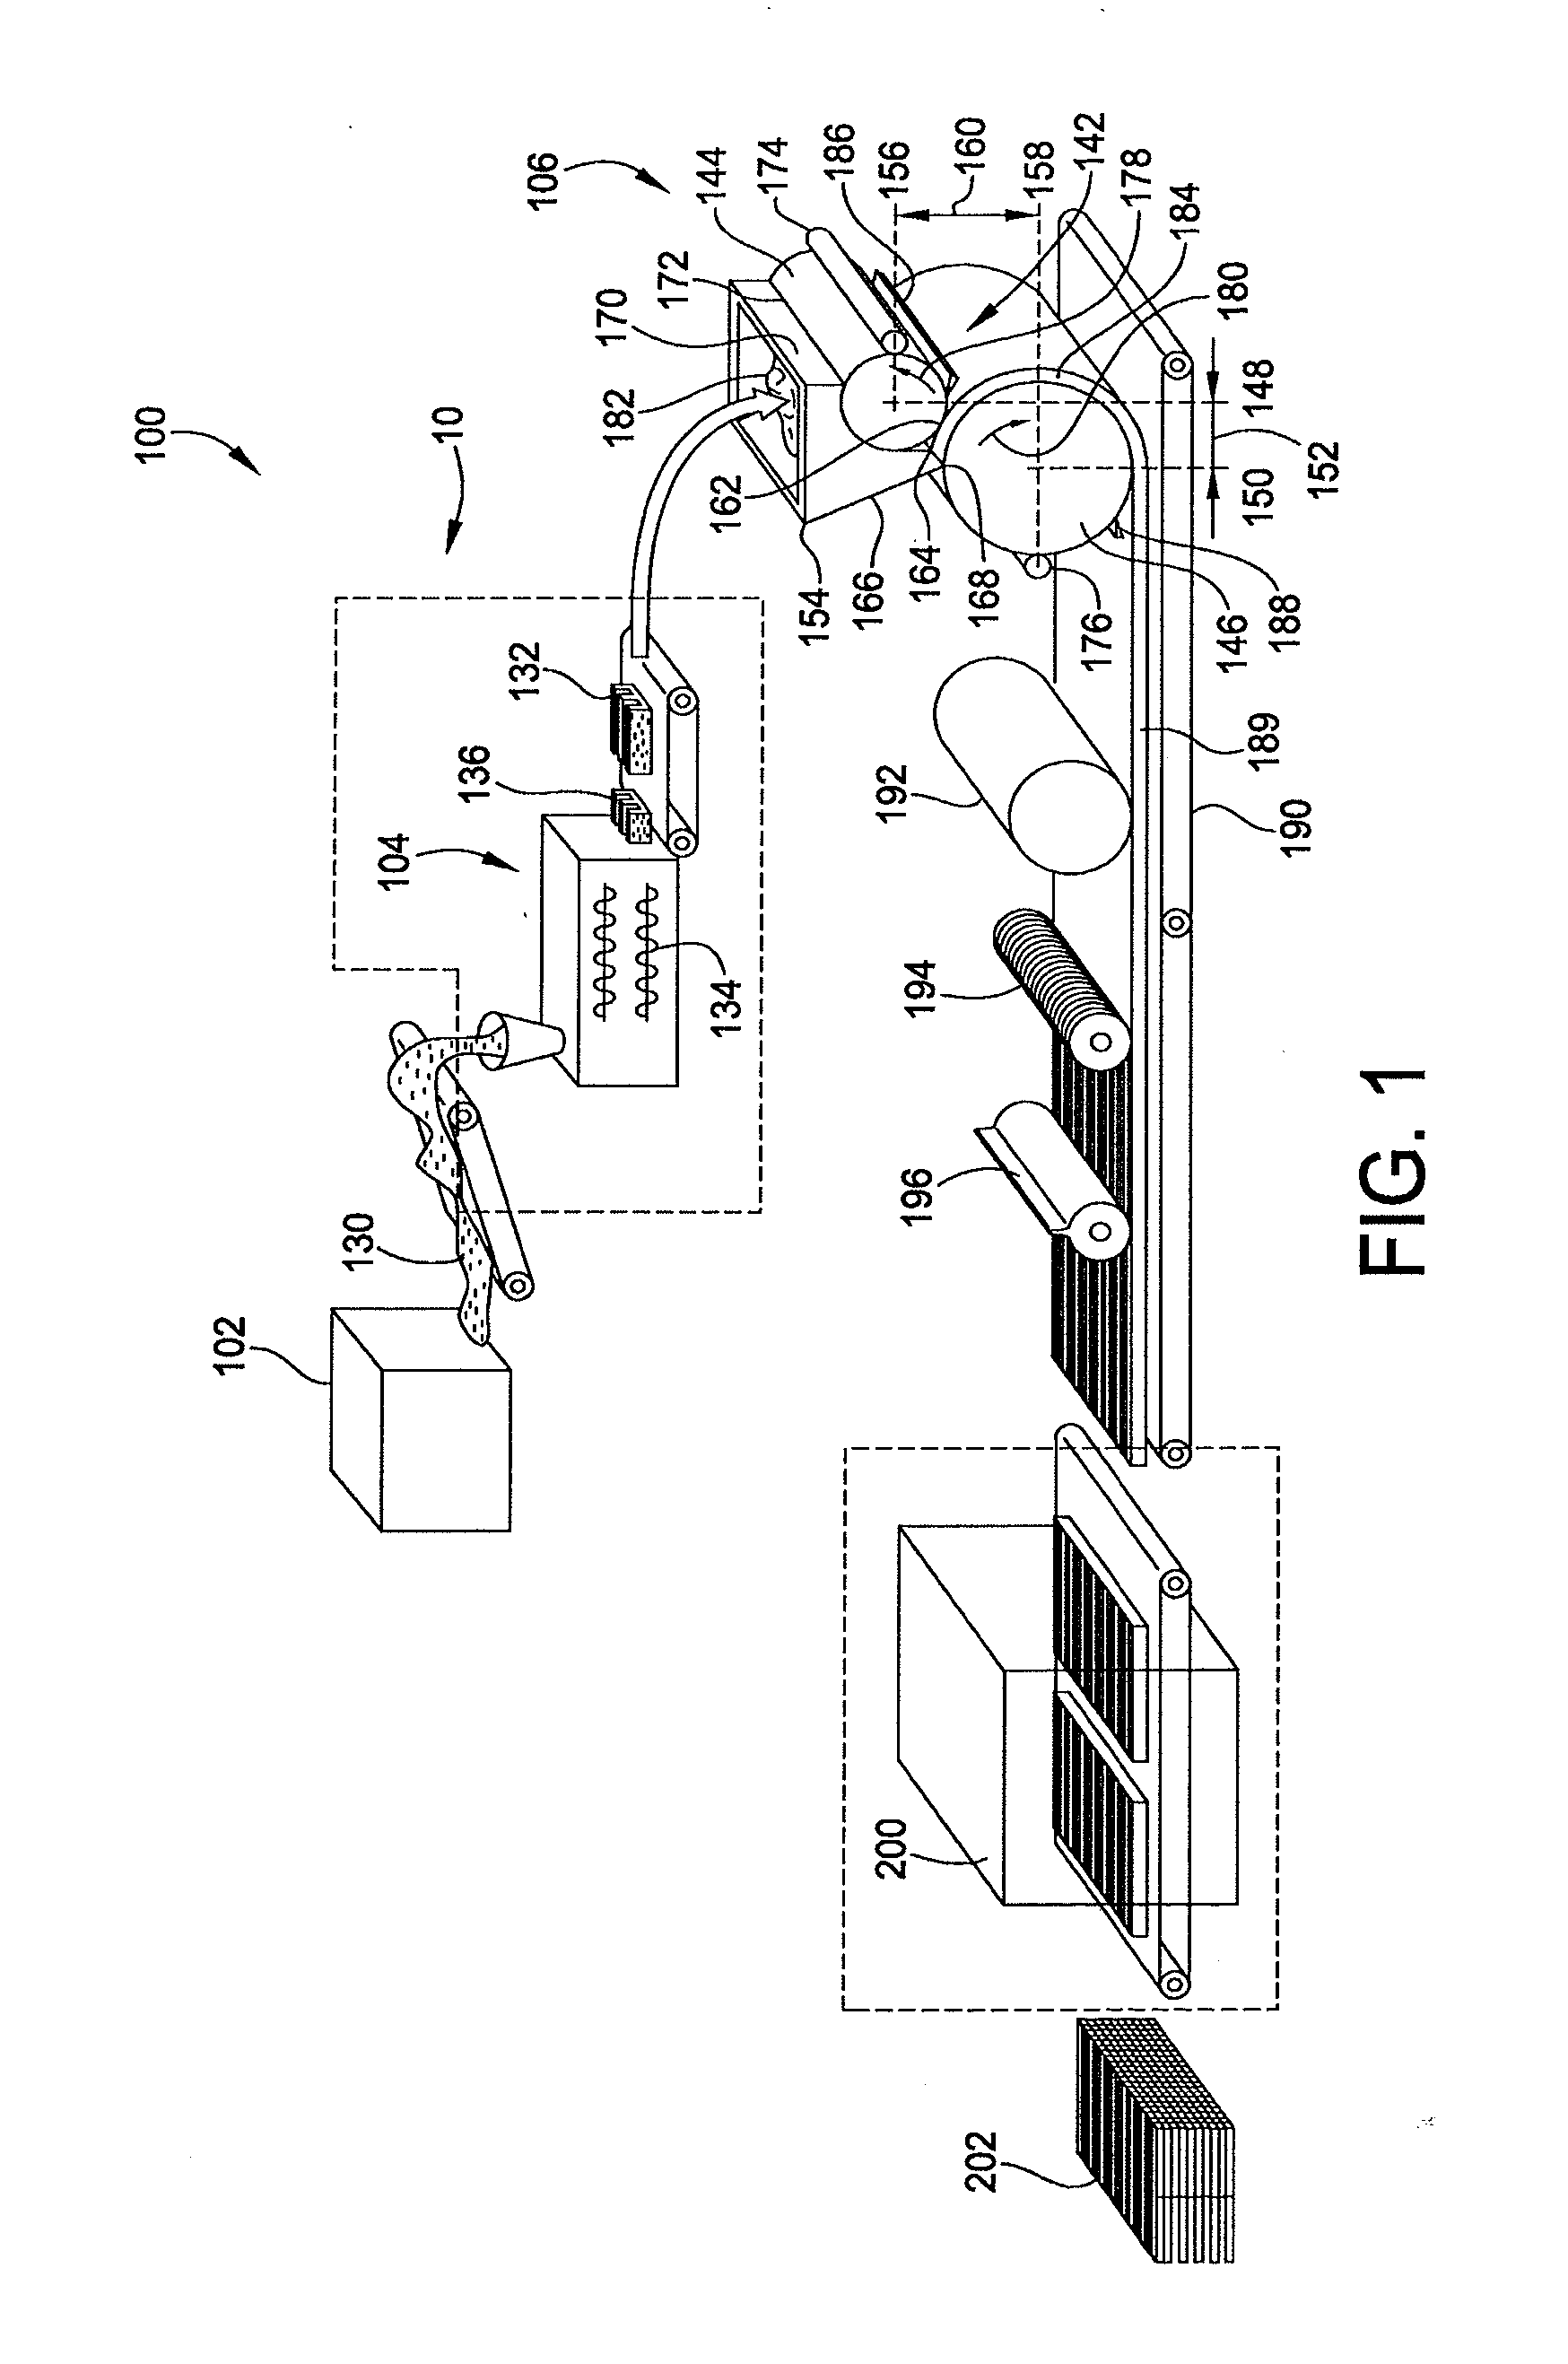 System and method of forming and sizing chewing gum and/or altering temperature of chewing gum